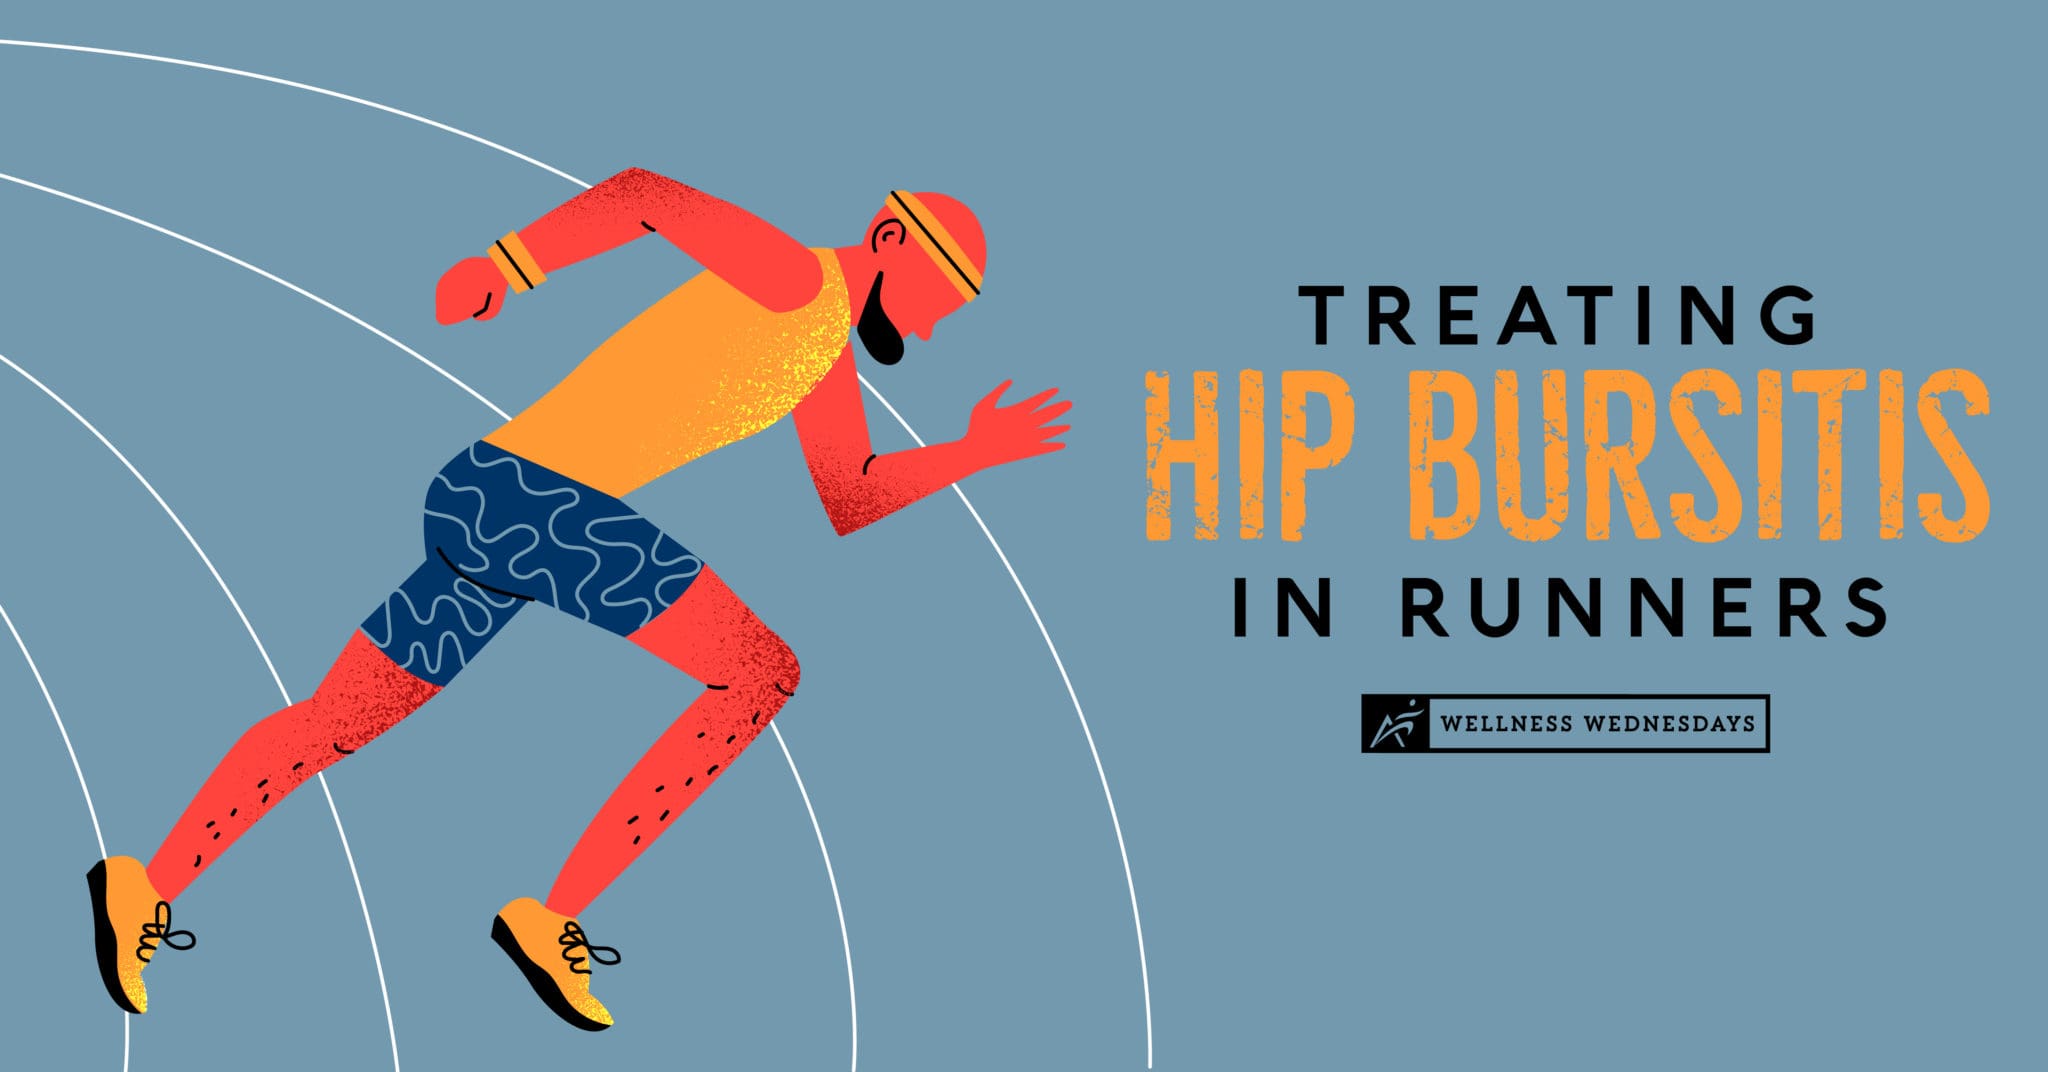 Have hip bursitis or lateral hip pain? Try this 